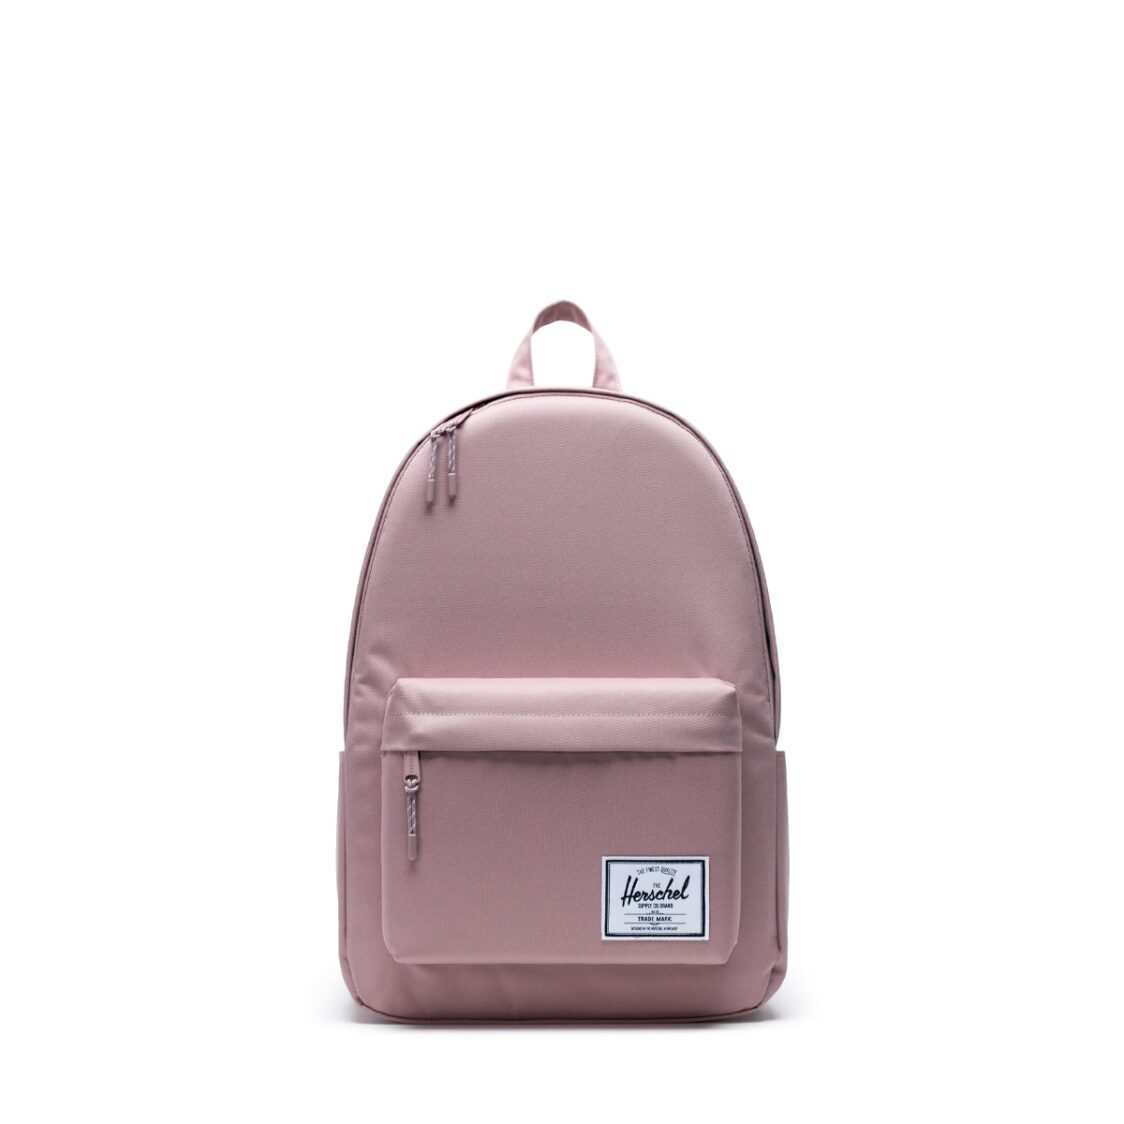 Herschel Classic X-Large Ash Rose Backpack 10492-02077-OS